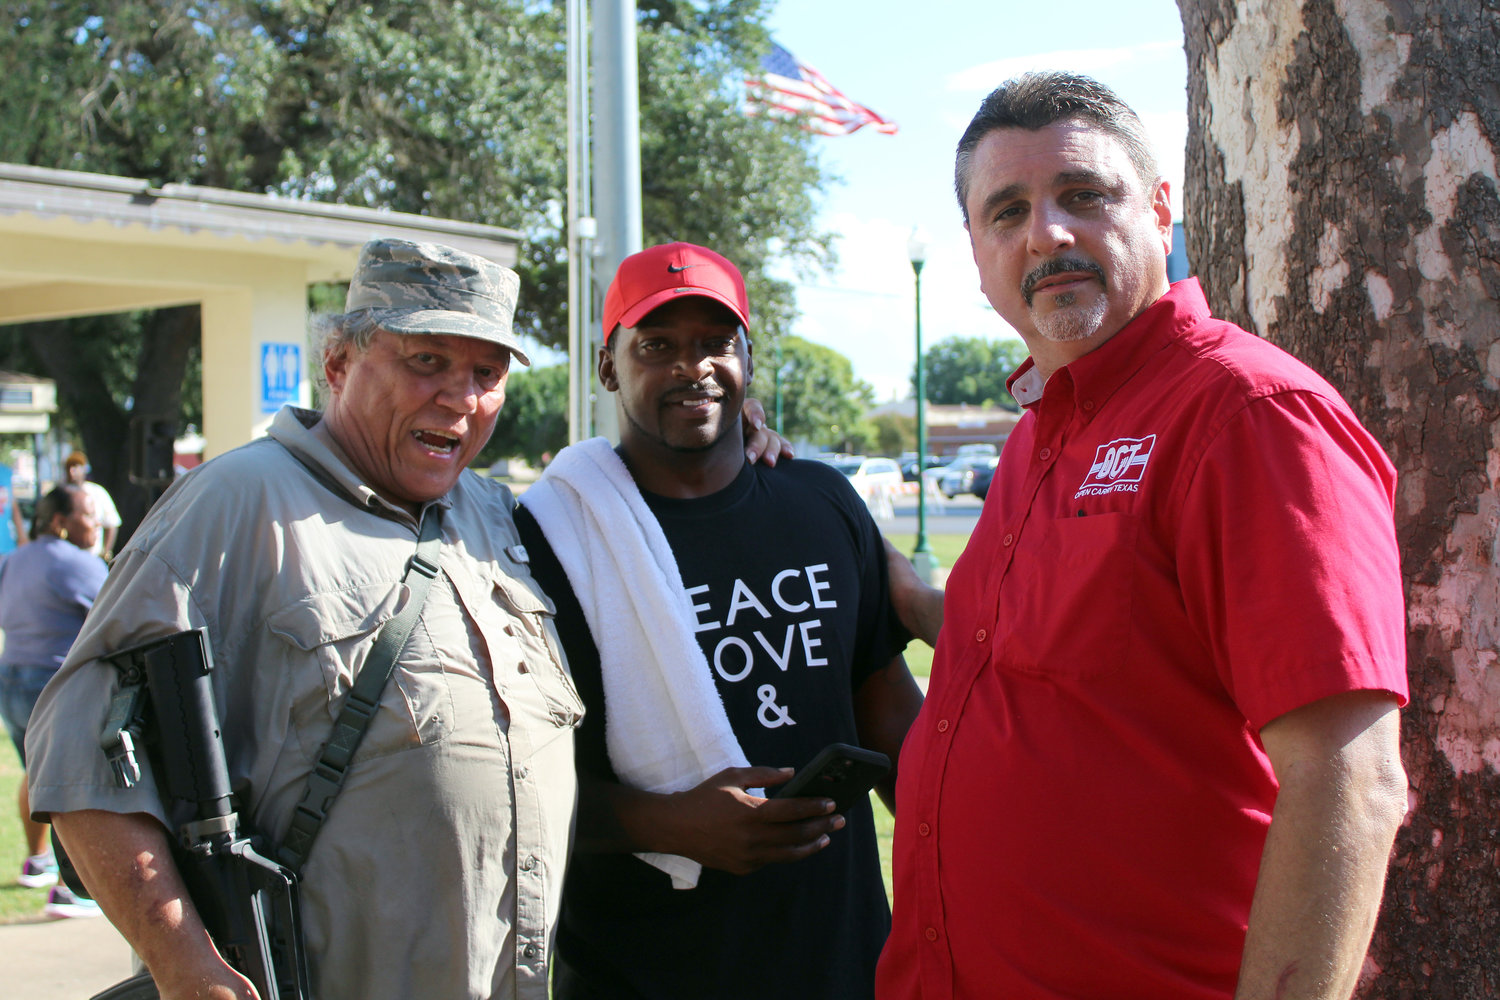 Mark Gurgevich, left, and David Amad, right, representing This is Texas Freedom Force and Open Cary Texas, meet with Gonzales Juneteenth co-coordinator Joe White prior to the start of the Juneteenth celebration in Confederate Square.